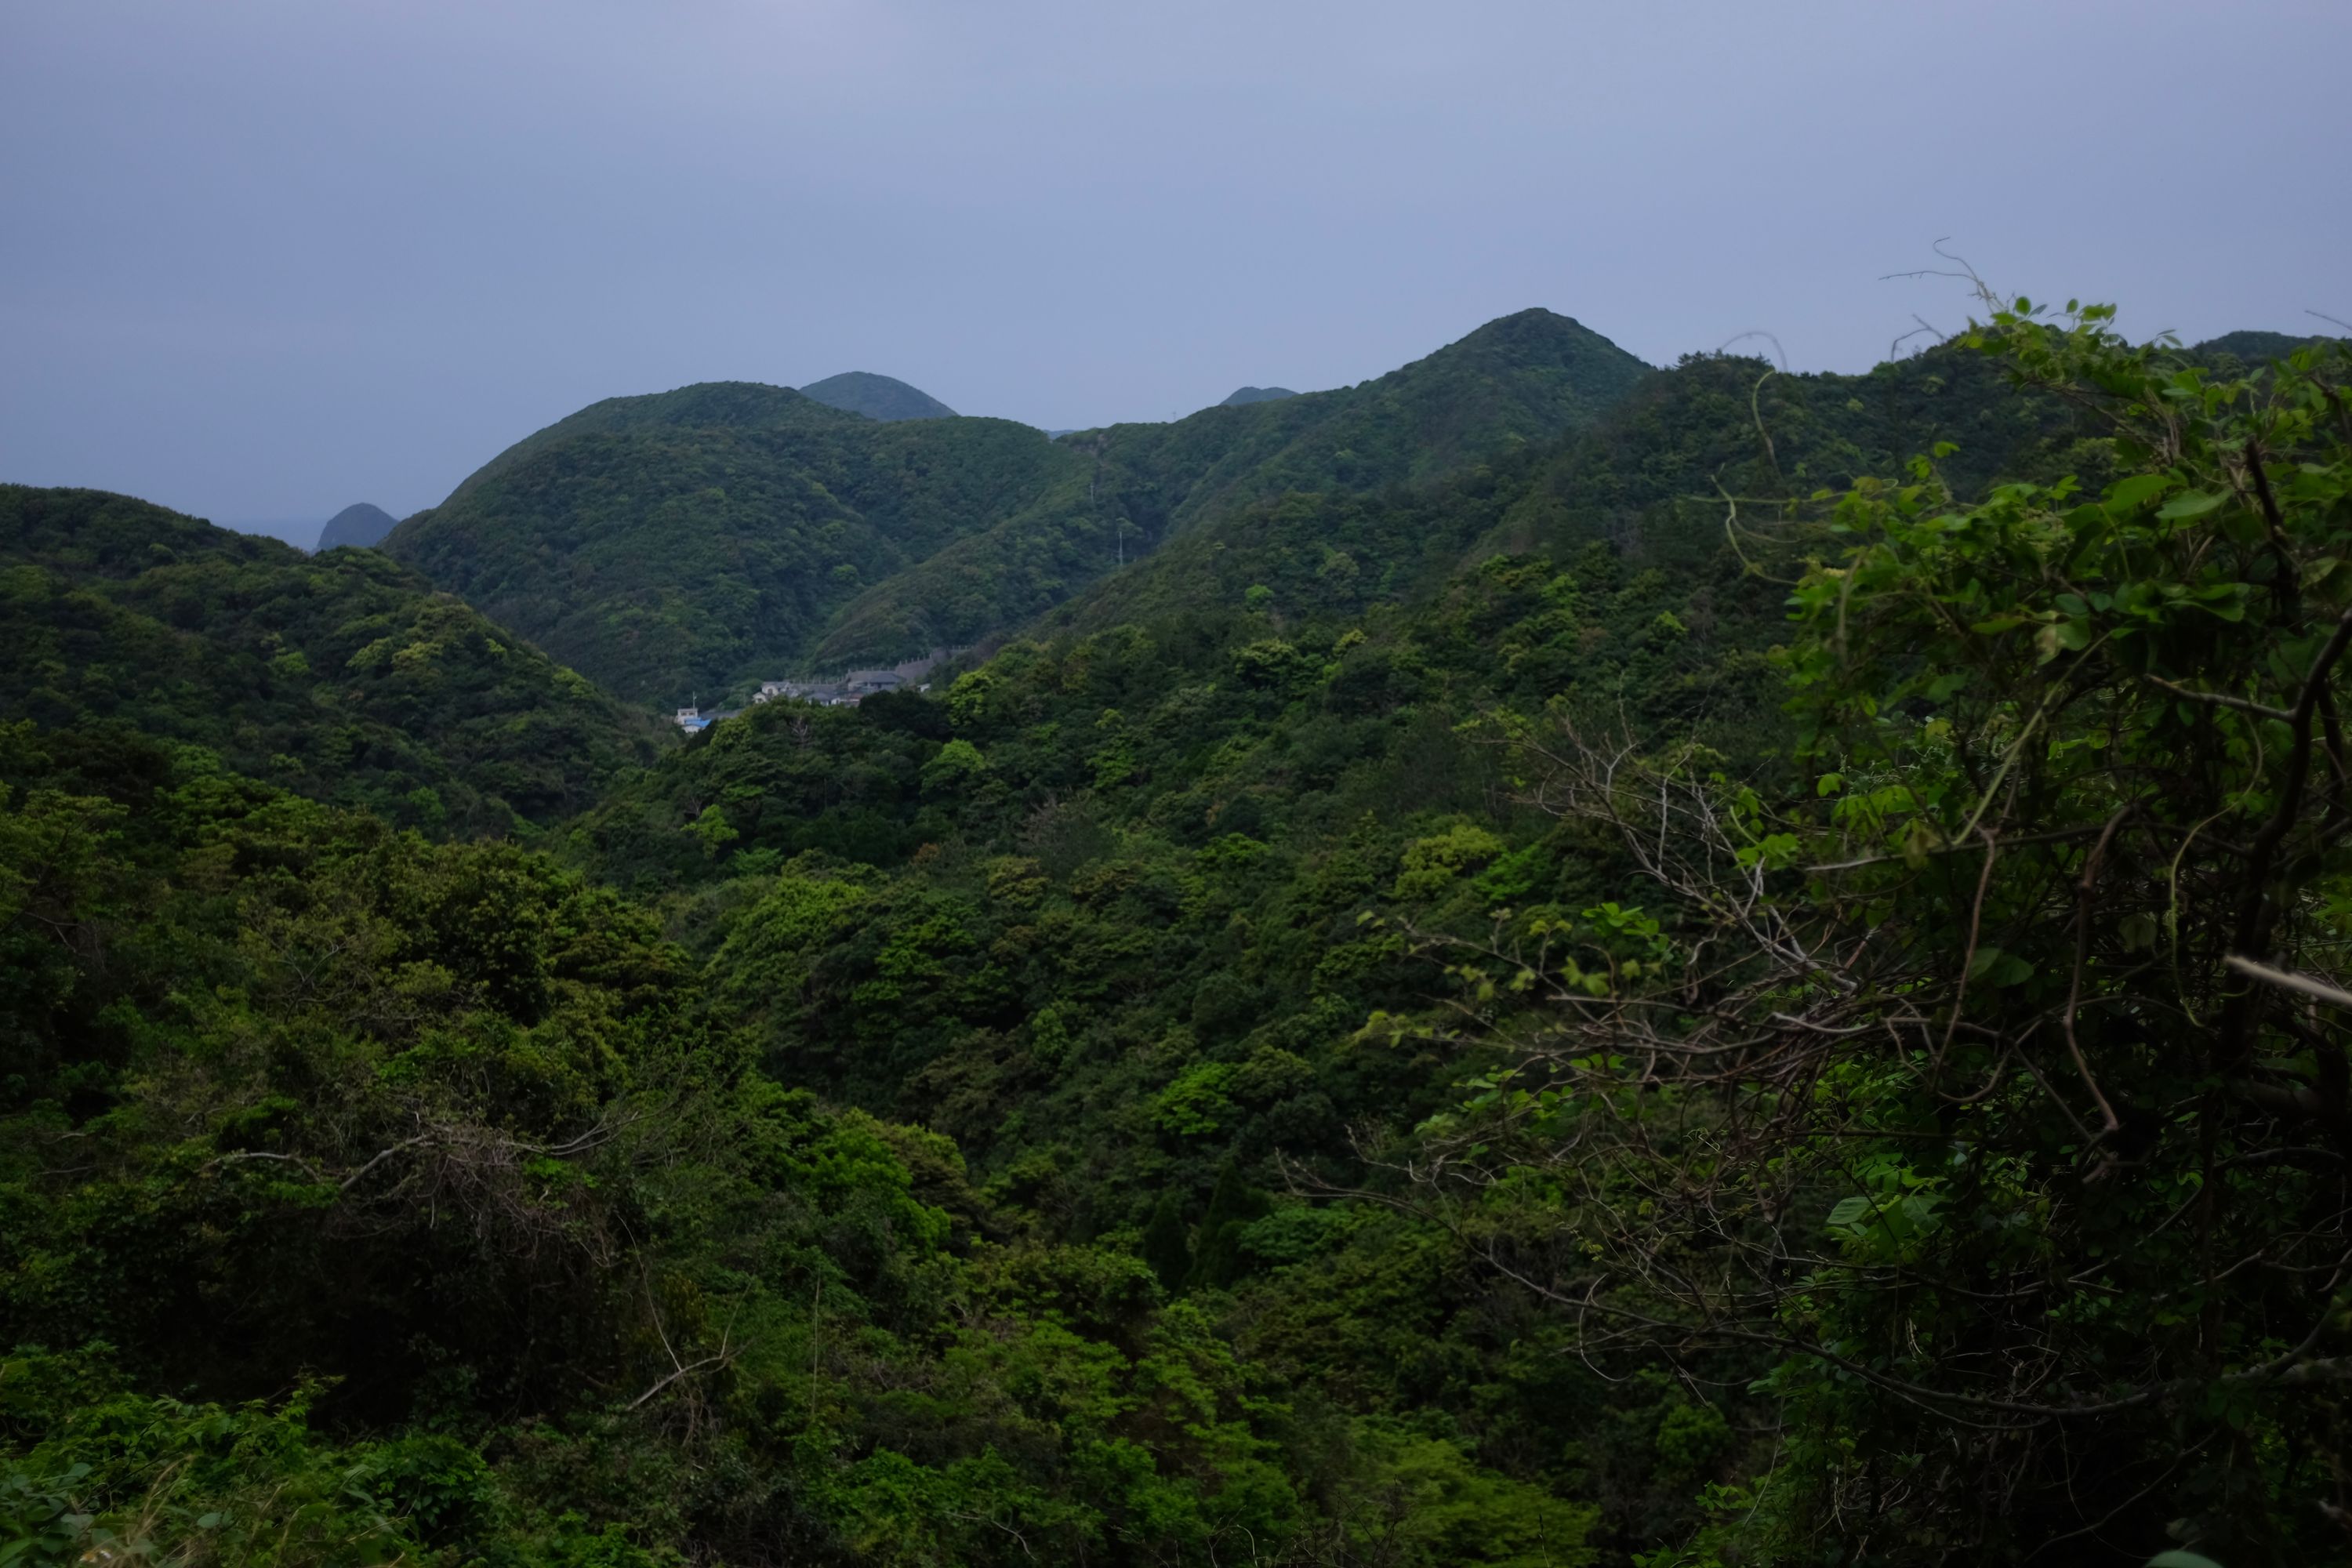 A small village in a valley of hills covered in dense jungle.